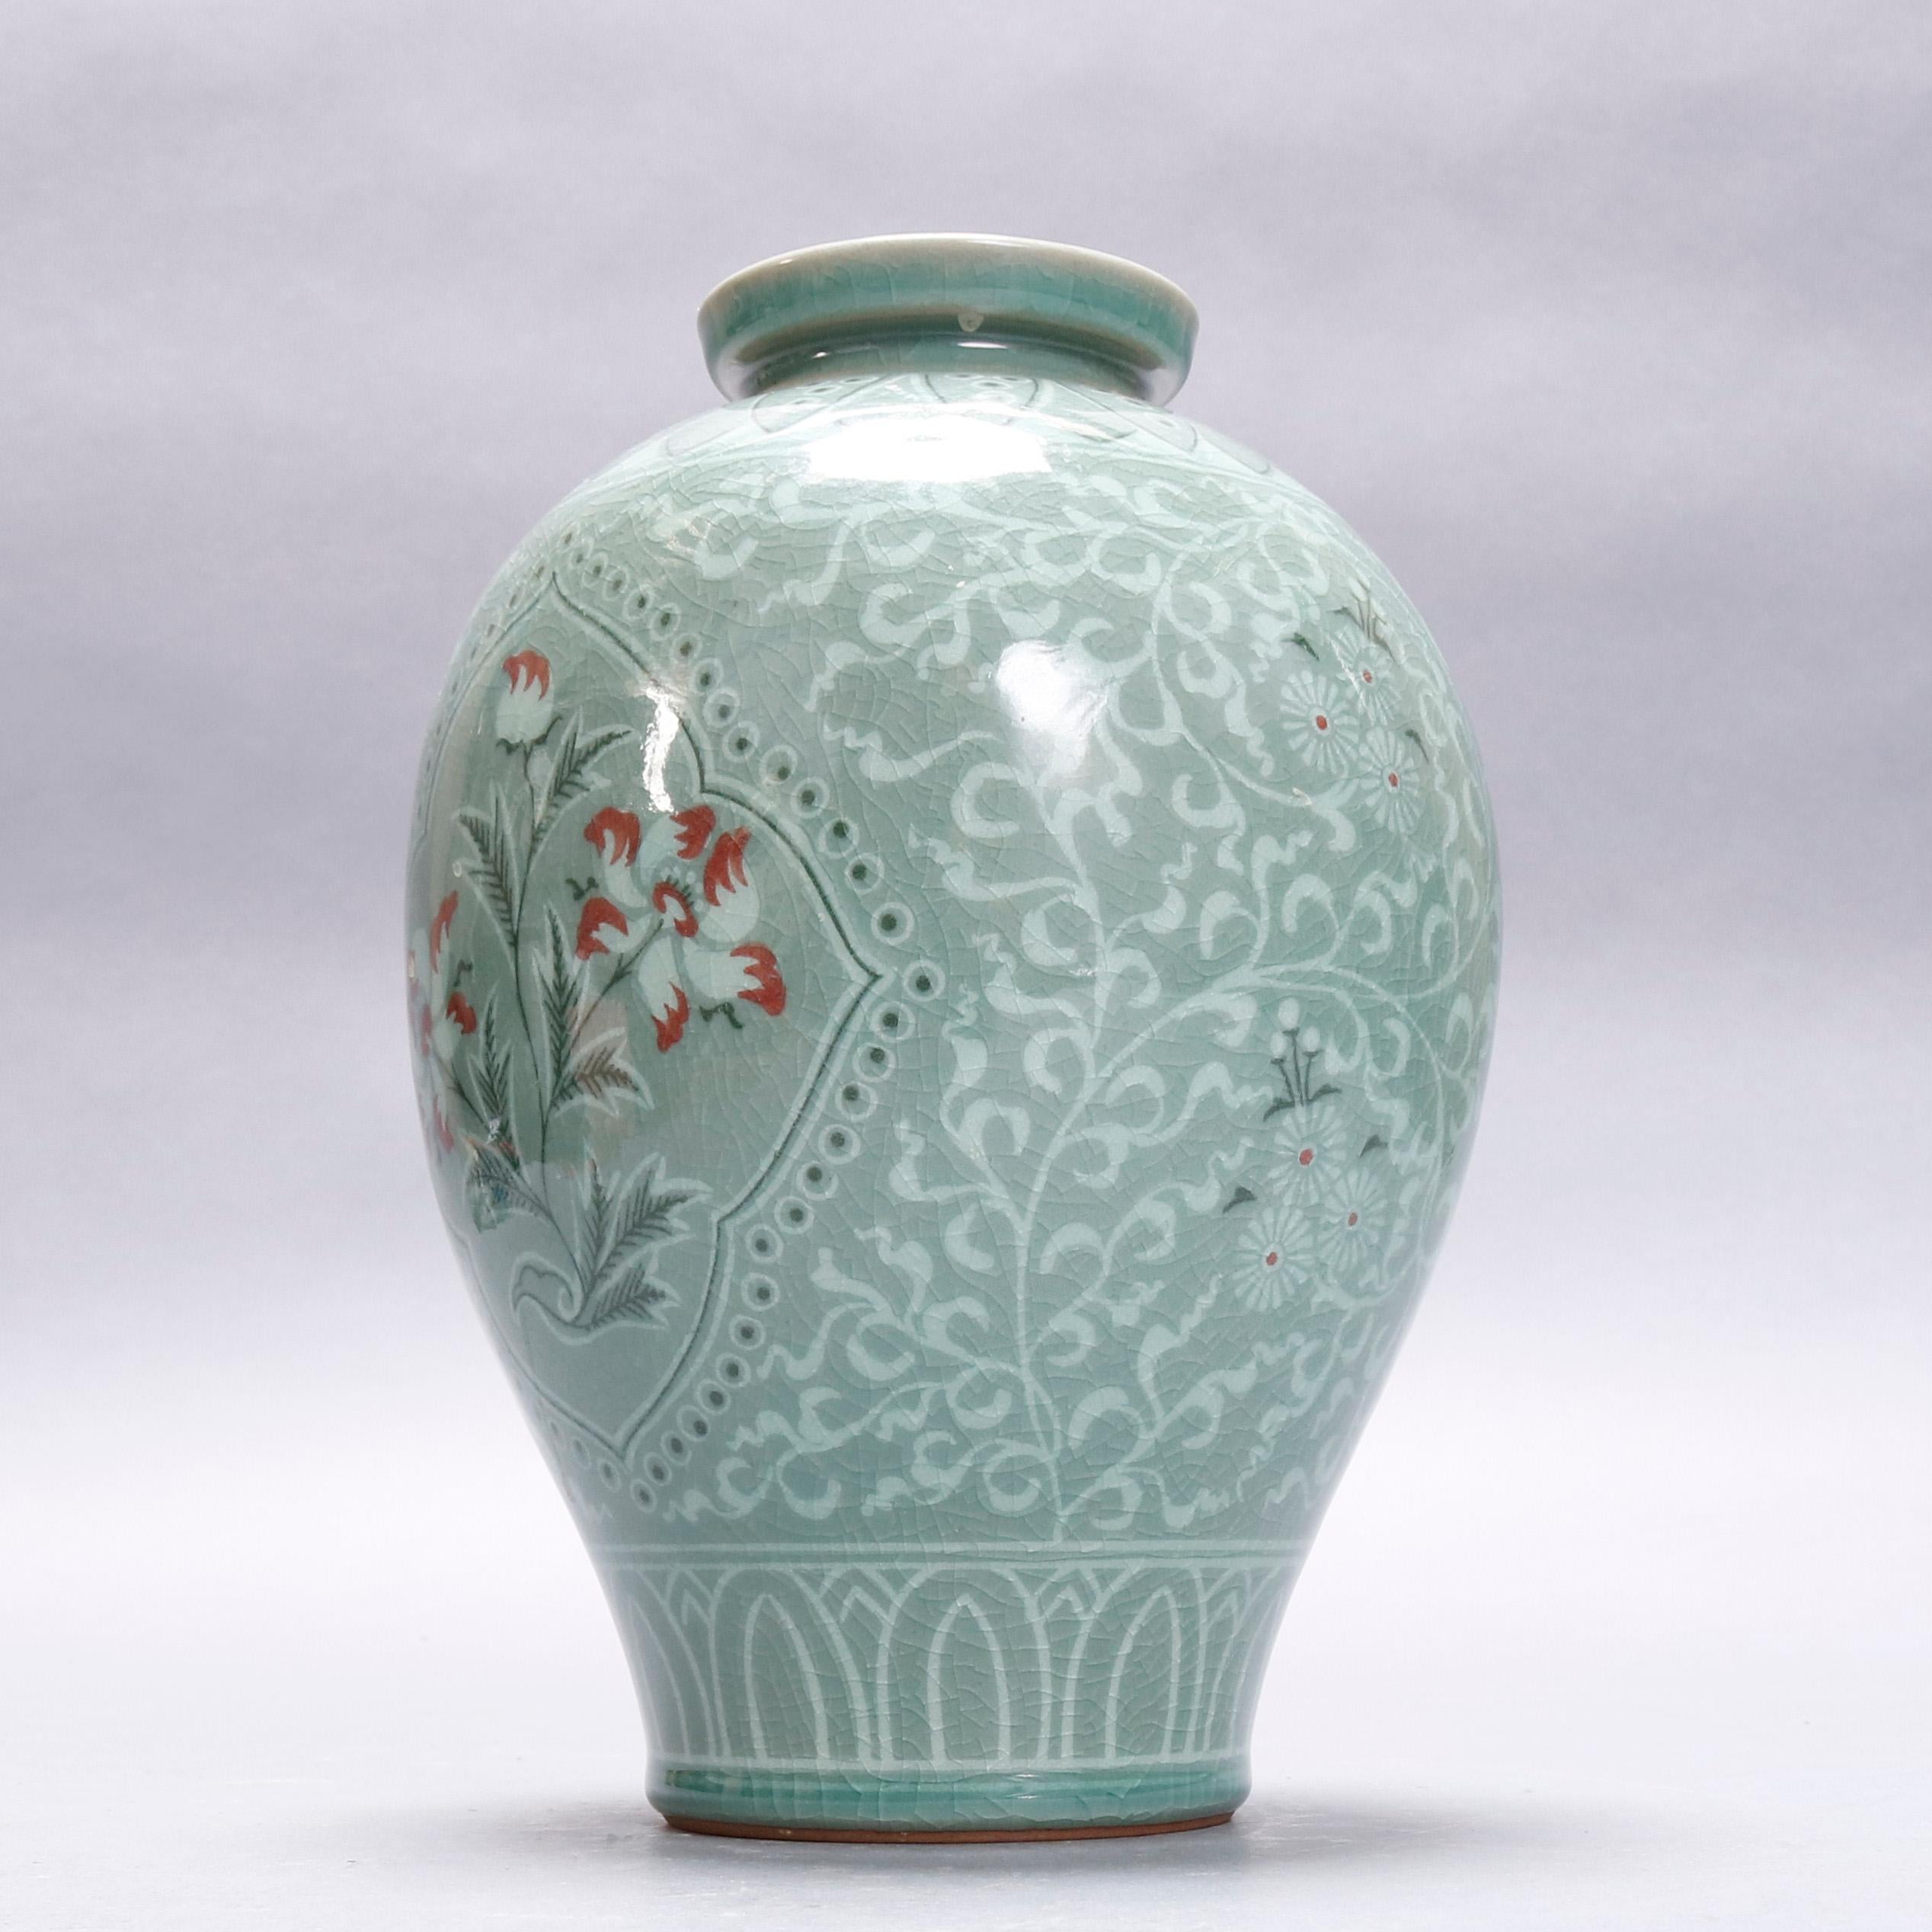 A Japanese bulbous porcelain vase offers jade green Celadon glazing with all-over scroll and foliate decoration having central floral reserve, repeating stylized leaf collar and base rim, chop mark signed on base, 20th century.

***DELIVERY NOTICE –